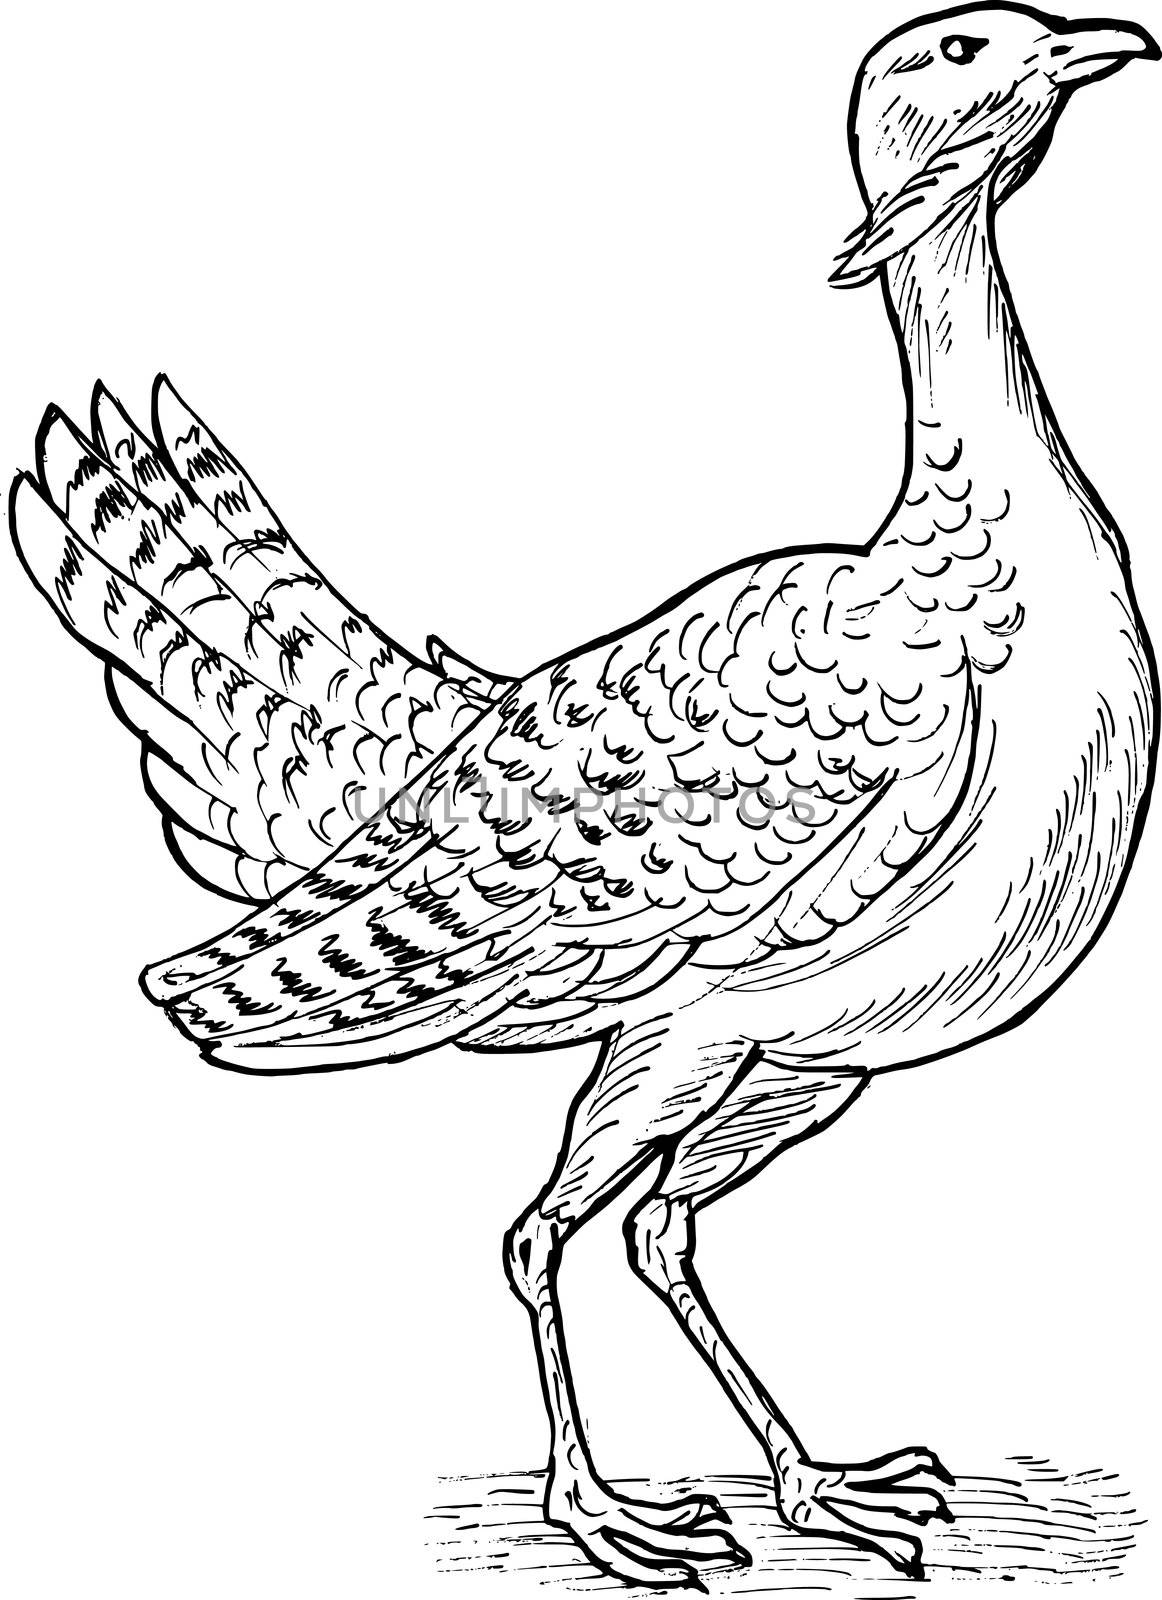 hand sketch drawing illustration of the Great bustard bird.